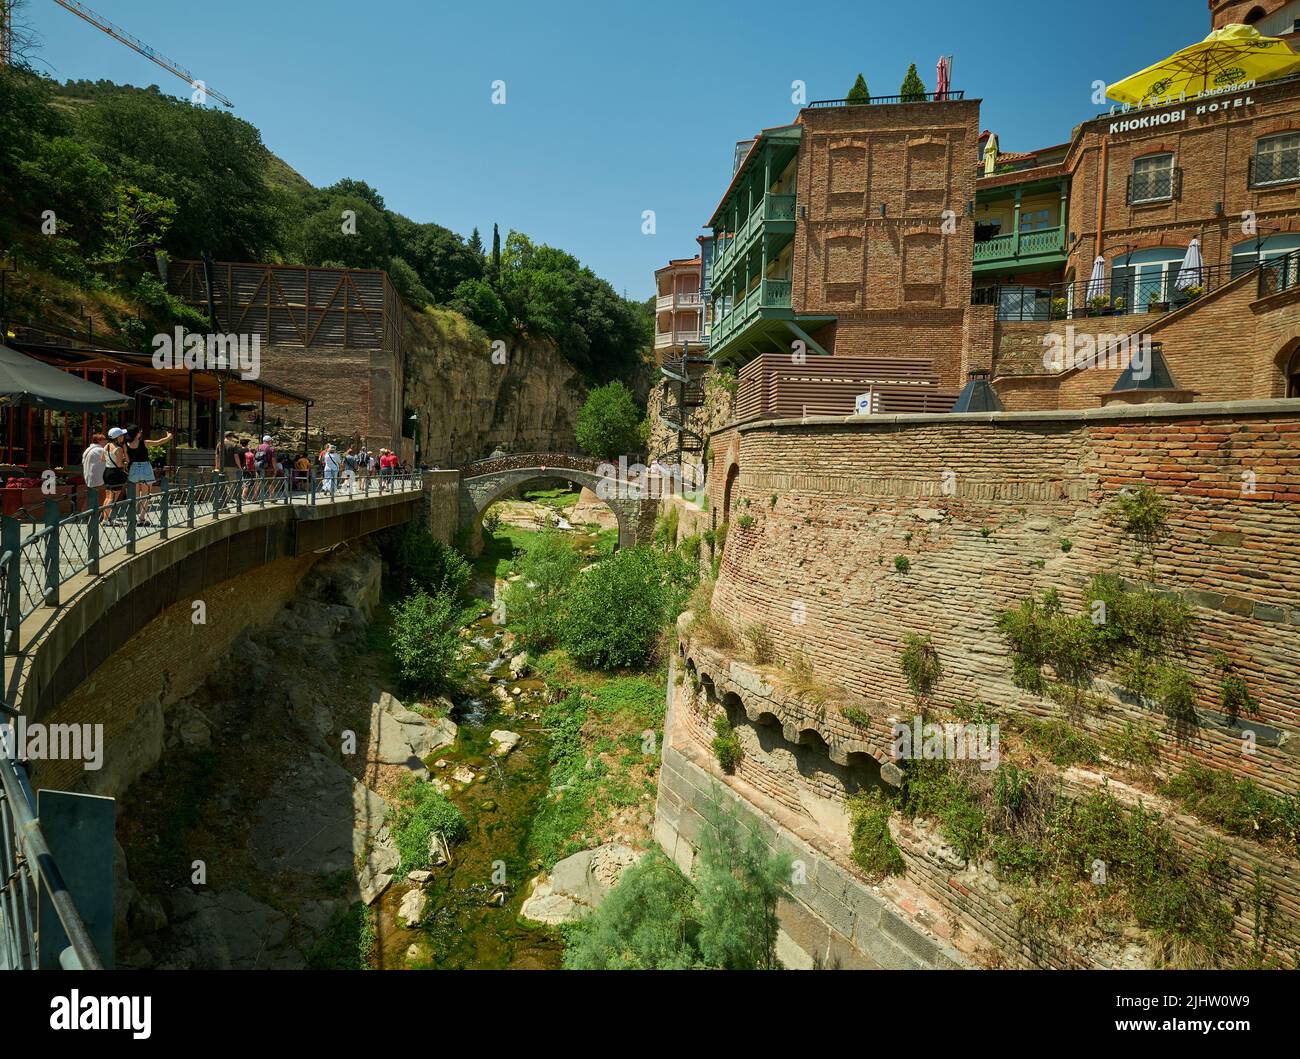 Abanotubani district in Old Tbilisi, Georgia where most of the Sulphur baths are located day light shoot showing bridge of love with visitors walking Stock Photo